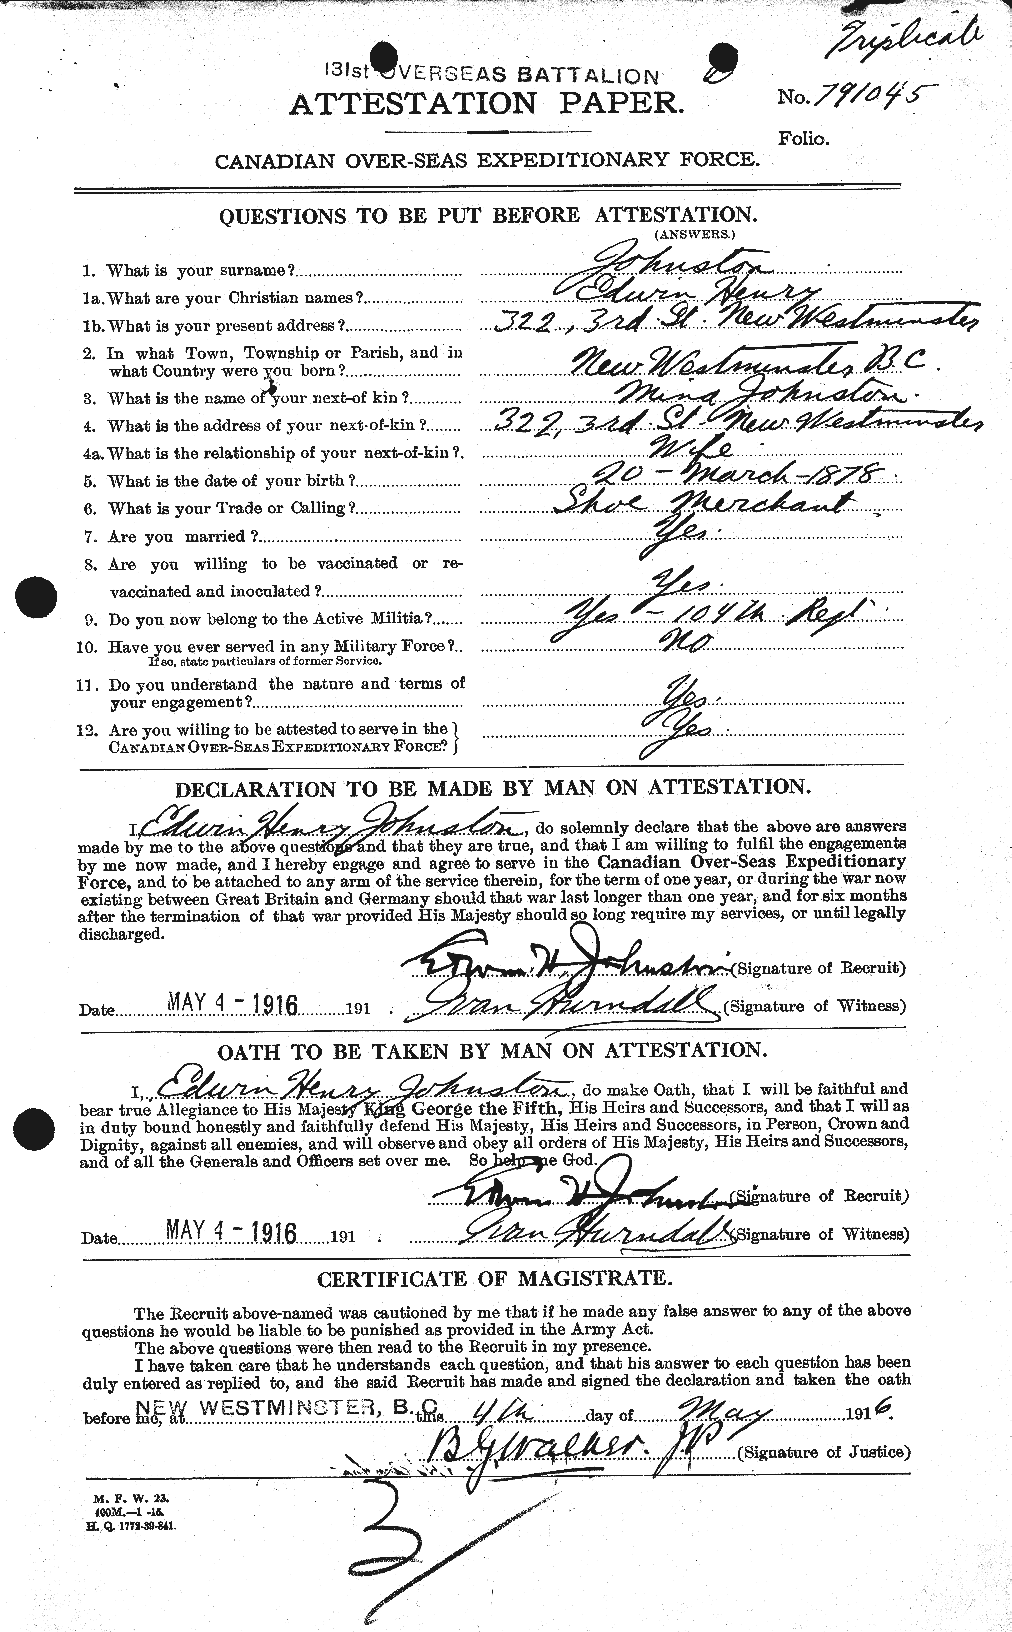 Personnel Records of the First World War - CEF 423235a